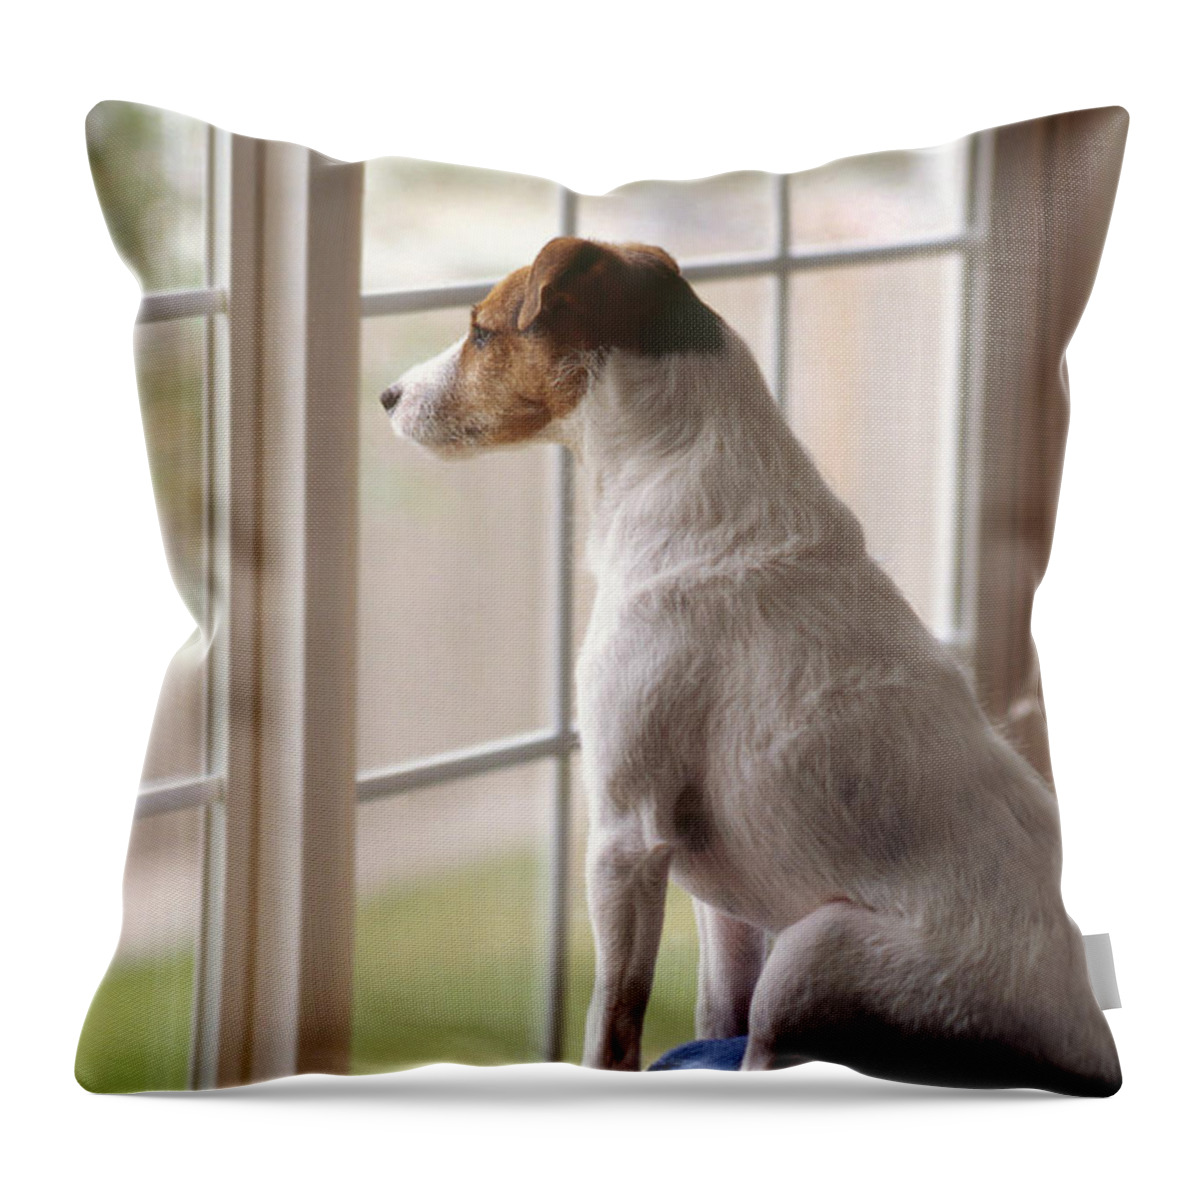 Jack Russell Terrier Throw Pillow featuring the photograph Jack Russell At Window by Jim Corwin